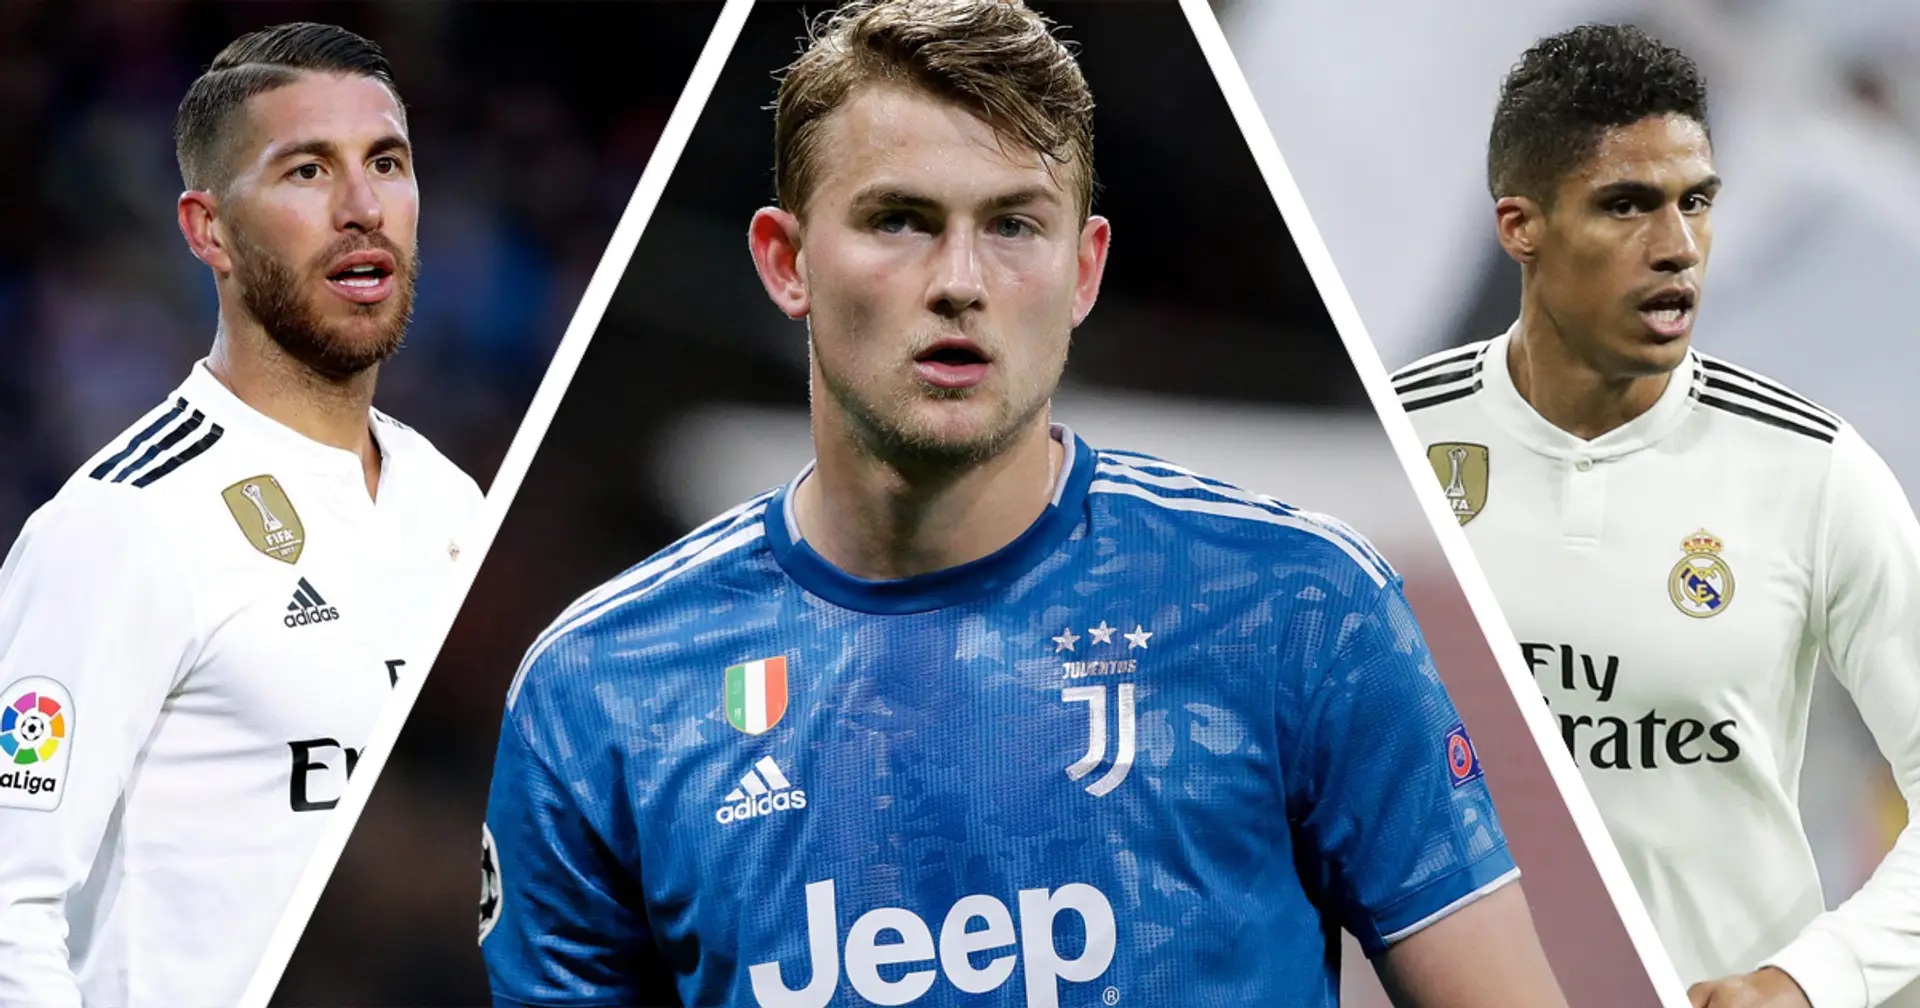 🤔 TUESDAY TACTICS: Who should be benched if Matthijs De Ligt arrives next season?